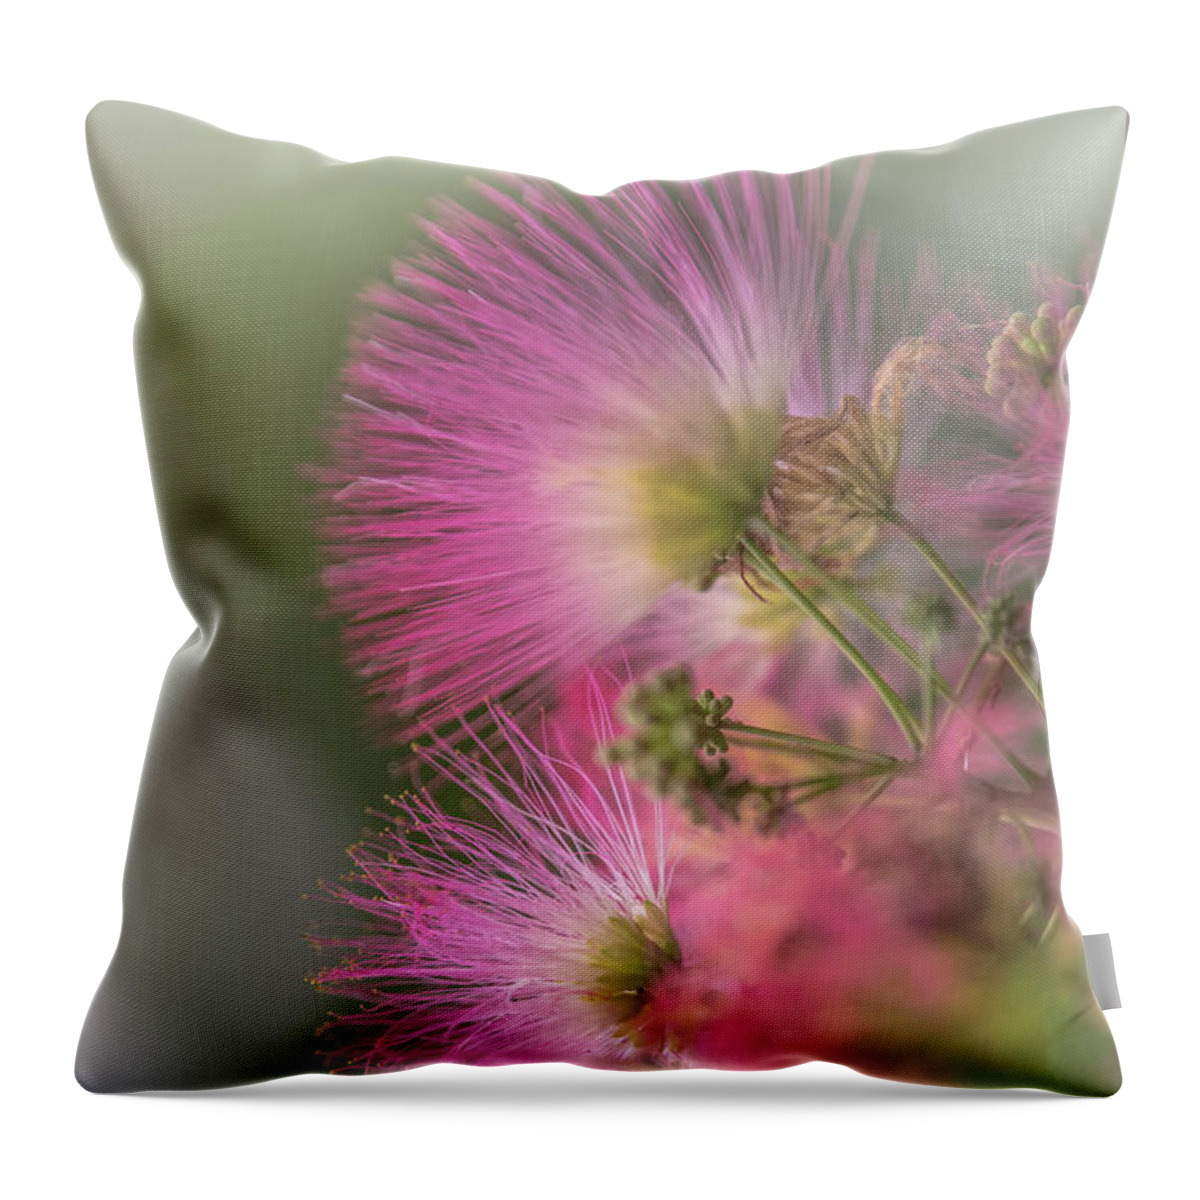 Formosa Throw Pillow featuring the photograph Formosa Dream by Bruce Pritchett